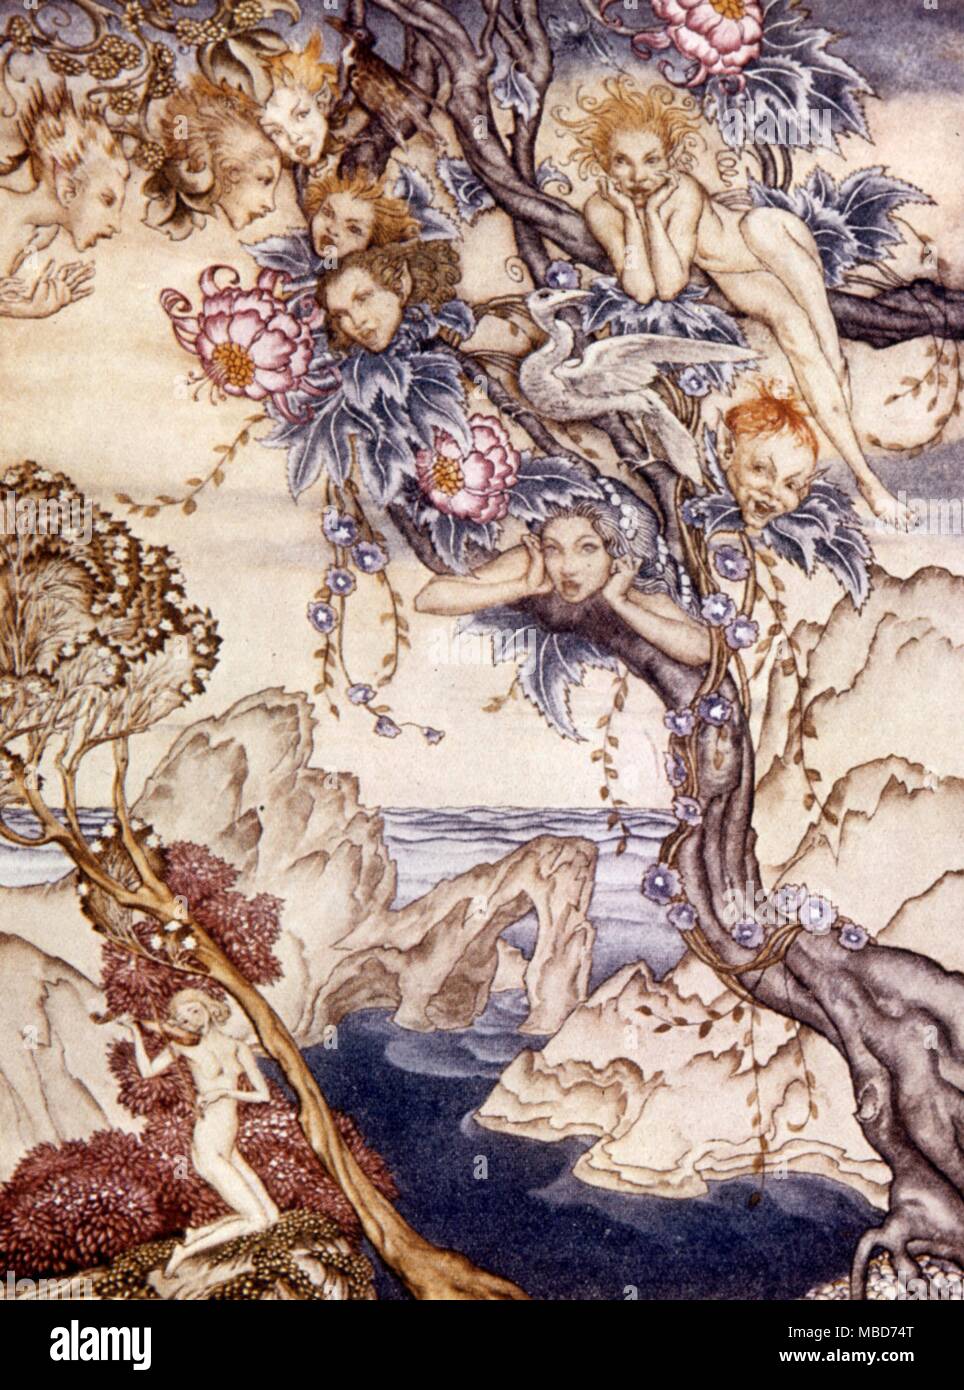 Fairies - The Isle is full of noises - Illustration to the 1926 edition of The Tempest by Arthur Rackham The fairy Ariel with other fairies, on the enchanted Island of Prospero - Illustration by Arthur Rackham to The Tempest 1906 Stock Photo